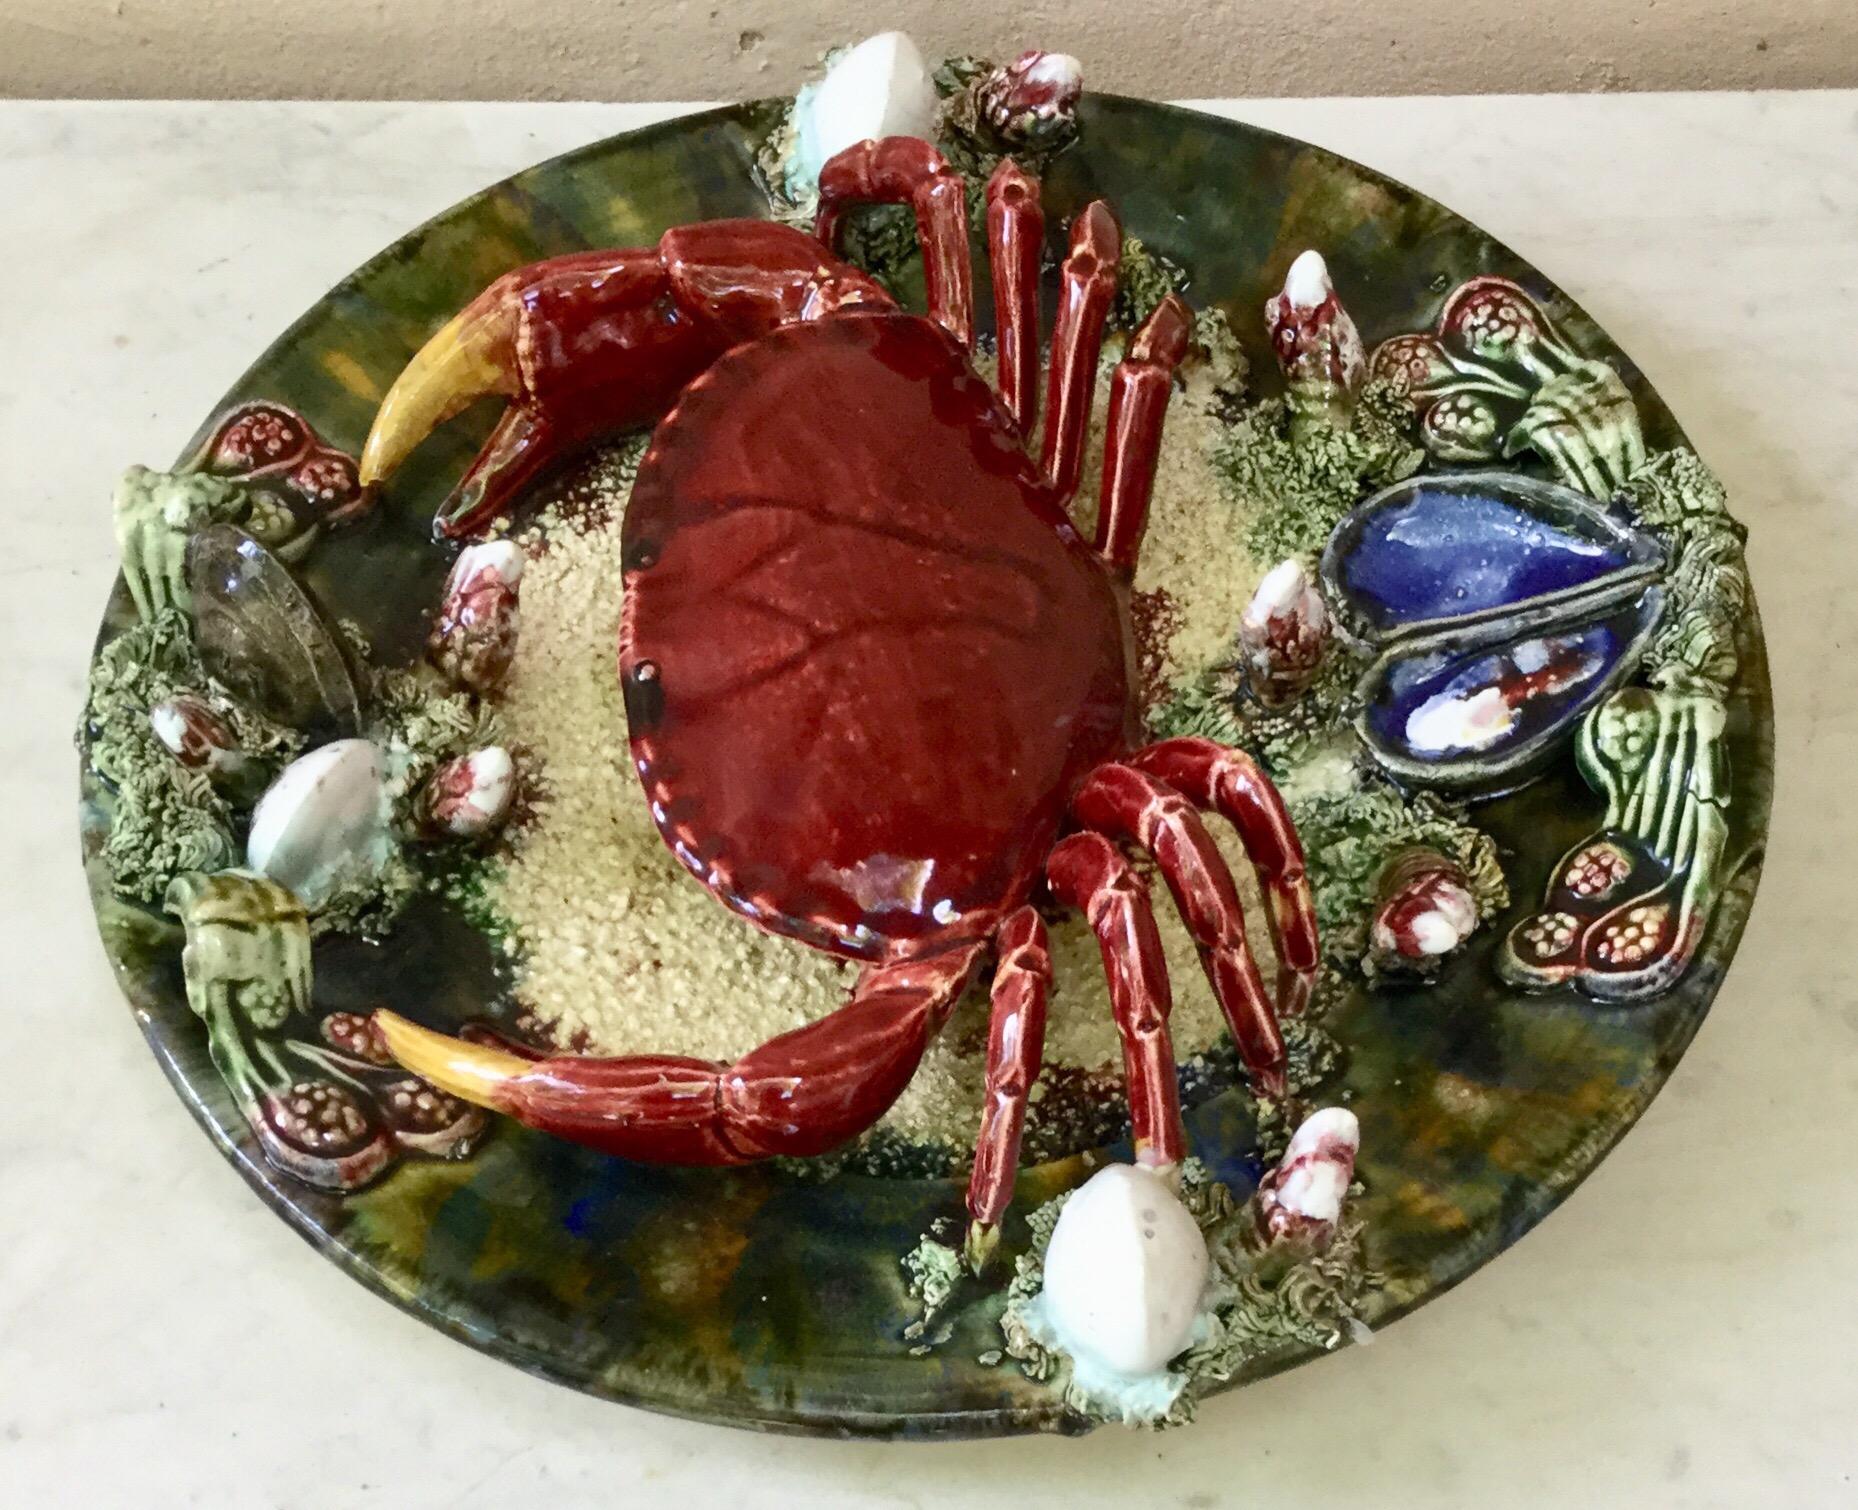 Majolica faience Palissy Portuguese crab platter, circa 1940.
Decorated with mussels and shells,
Signed Caldas da Rainha.
Nautical.